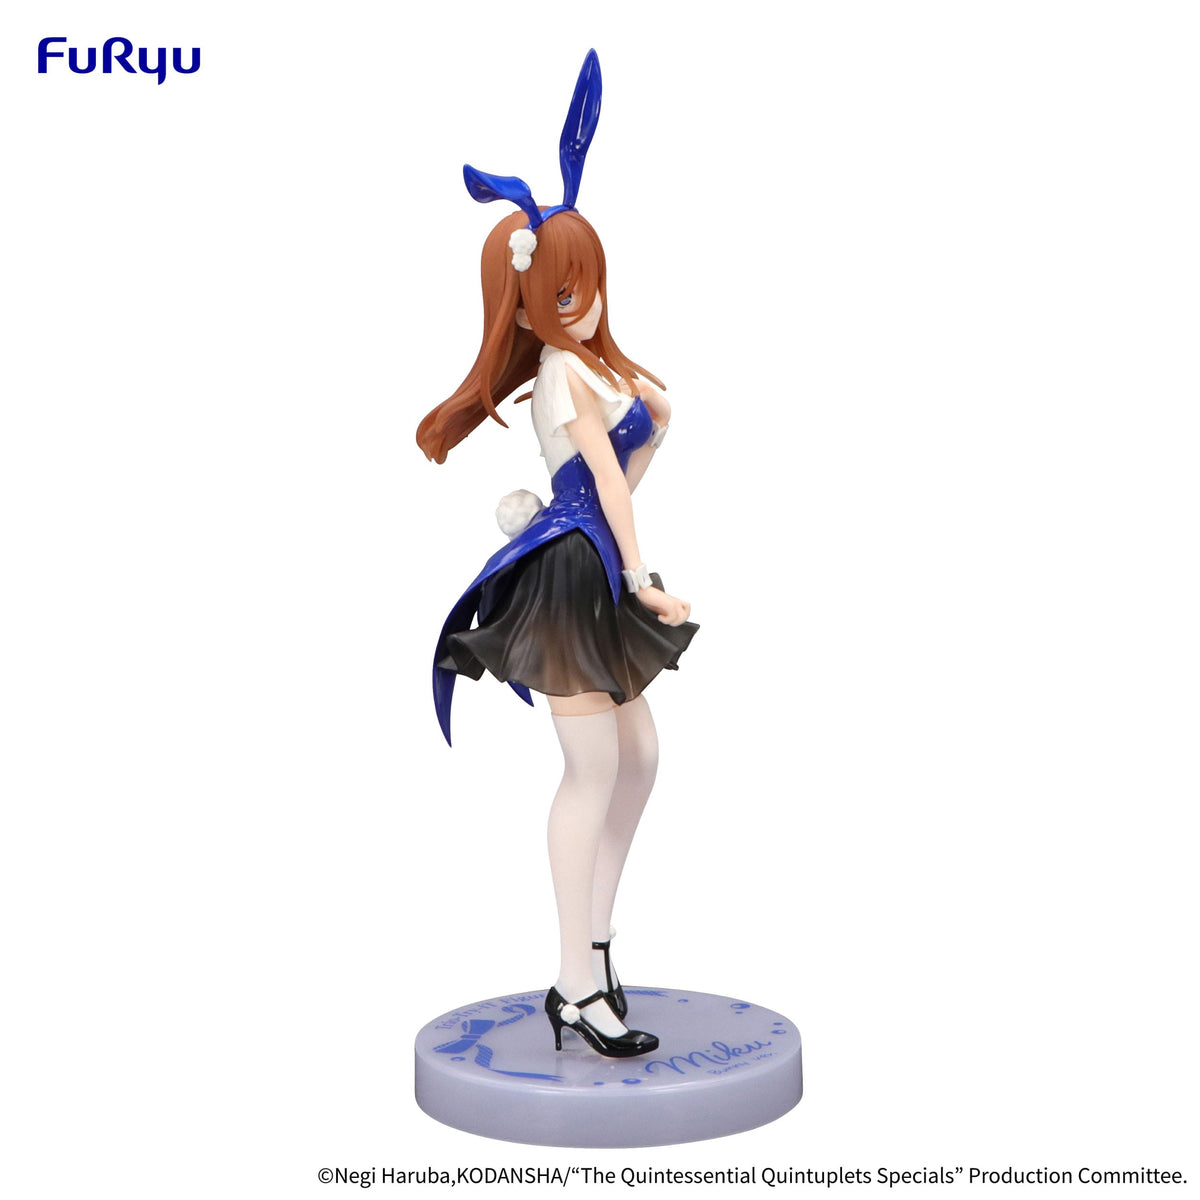 The Quintessential Quintuplets - Miku Nakano - Bunnies Another Color Trio-Try-iT Figur (Furyu)